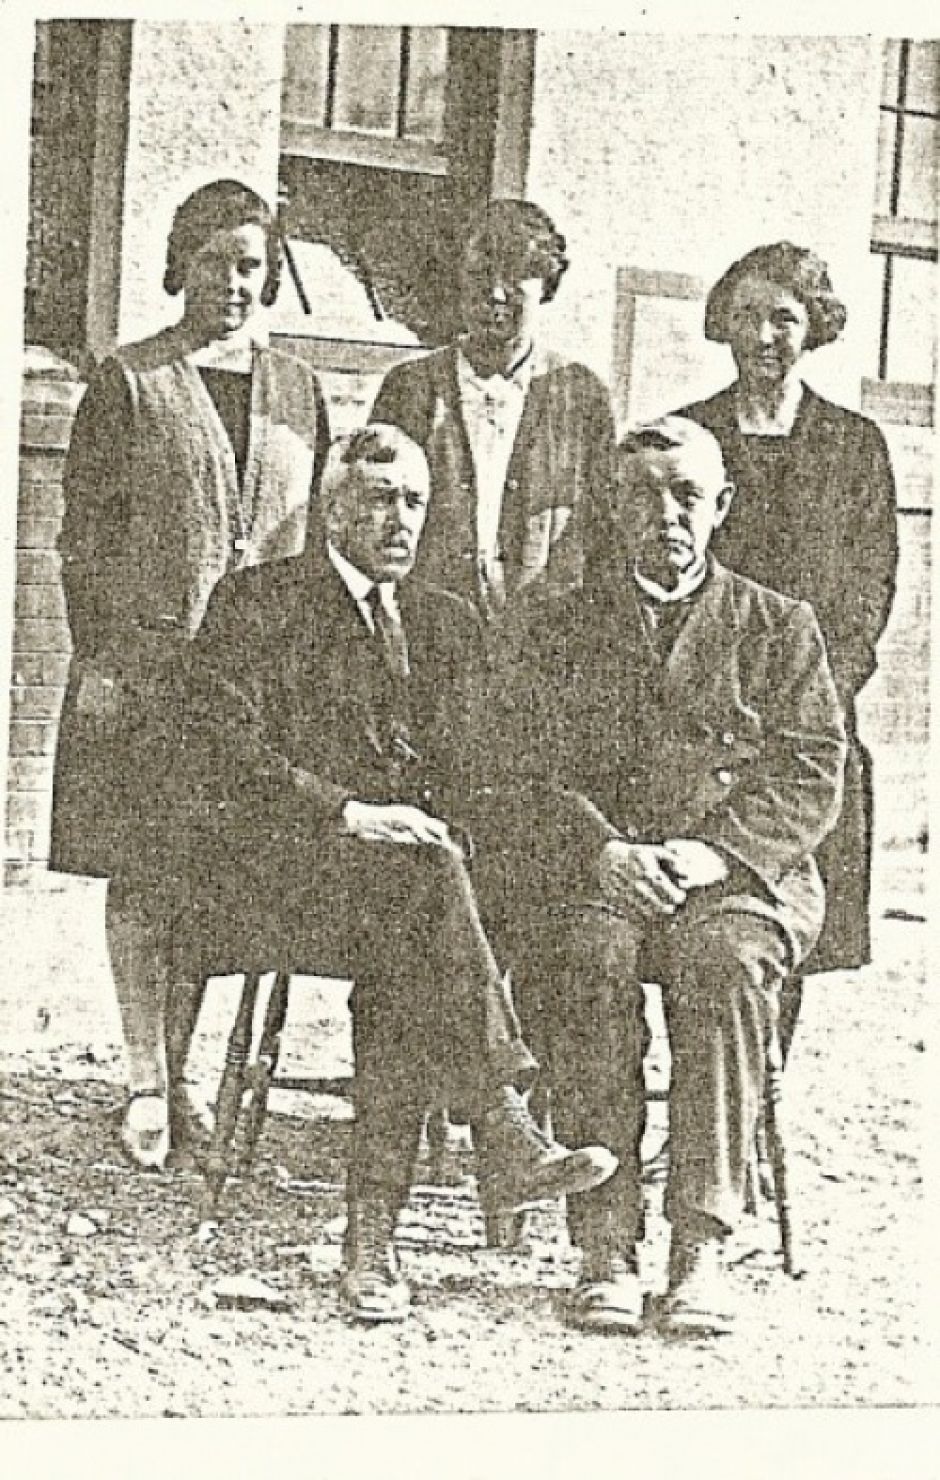 The first staff with Dr. Thompson, seated on the left in the front row.